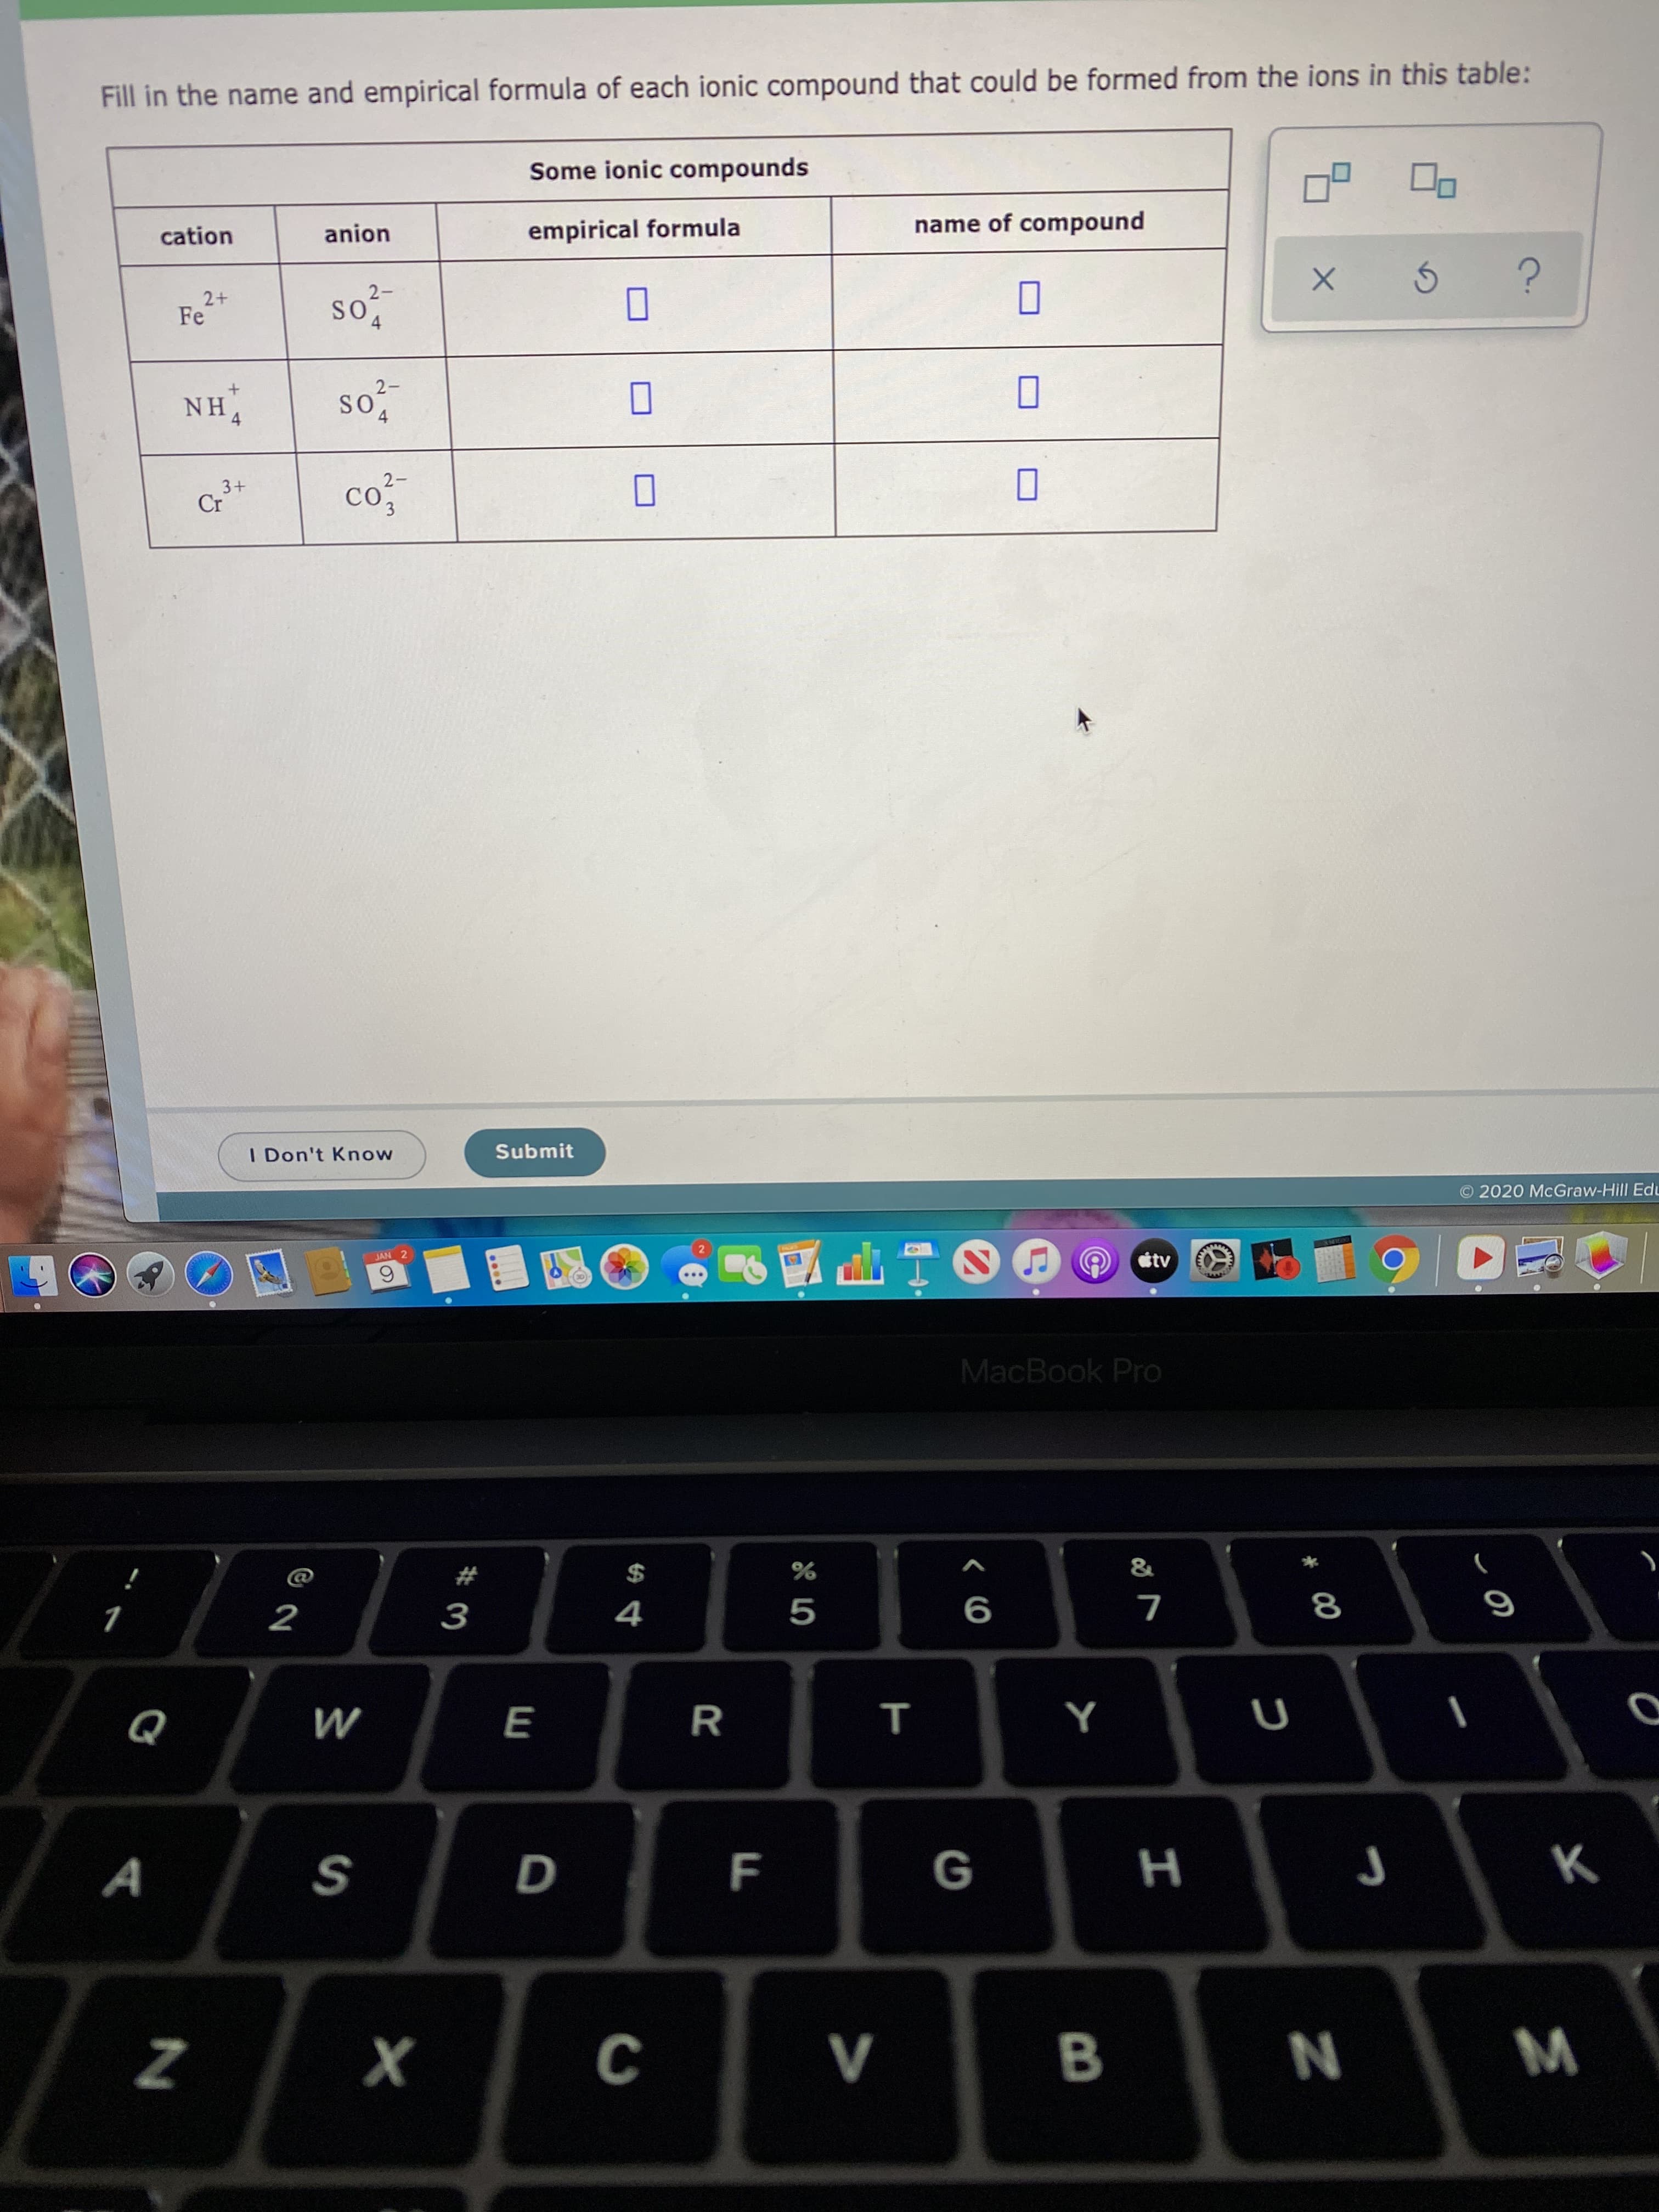 Fill in the name and empirical formula of each ionic compound that could be formed from the ions in this table:
Some ionic compounds
name of compound
empirical formula
anion
cation
so
2-
SO
2+
Fe
2-
SO
so
NH4
co
2-
CO
3+
Cr
Submit
I Don't Know
2020 McGraw-Hill Edu
tv
JAN 2
MacBook Pro
%2$
8
V
х
F.
